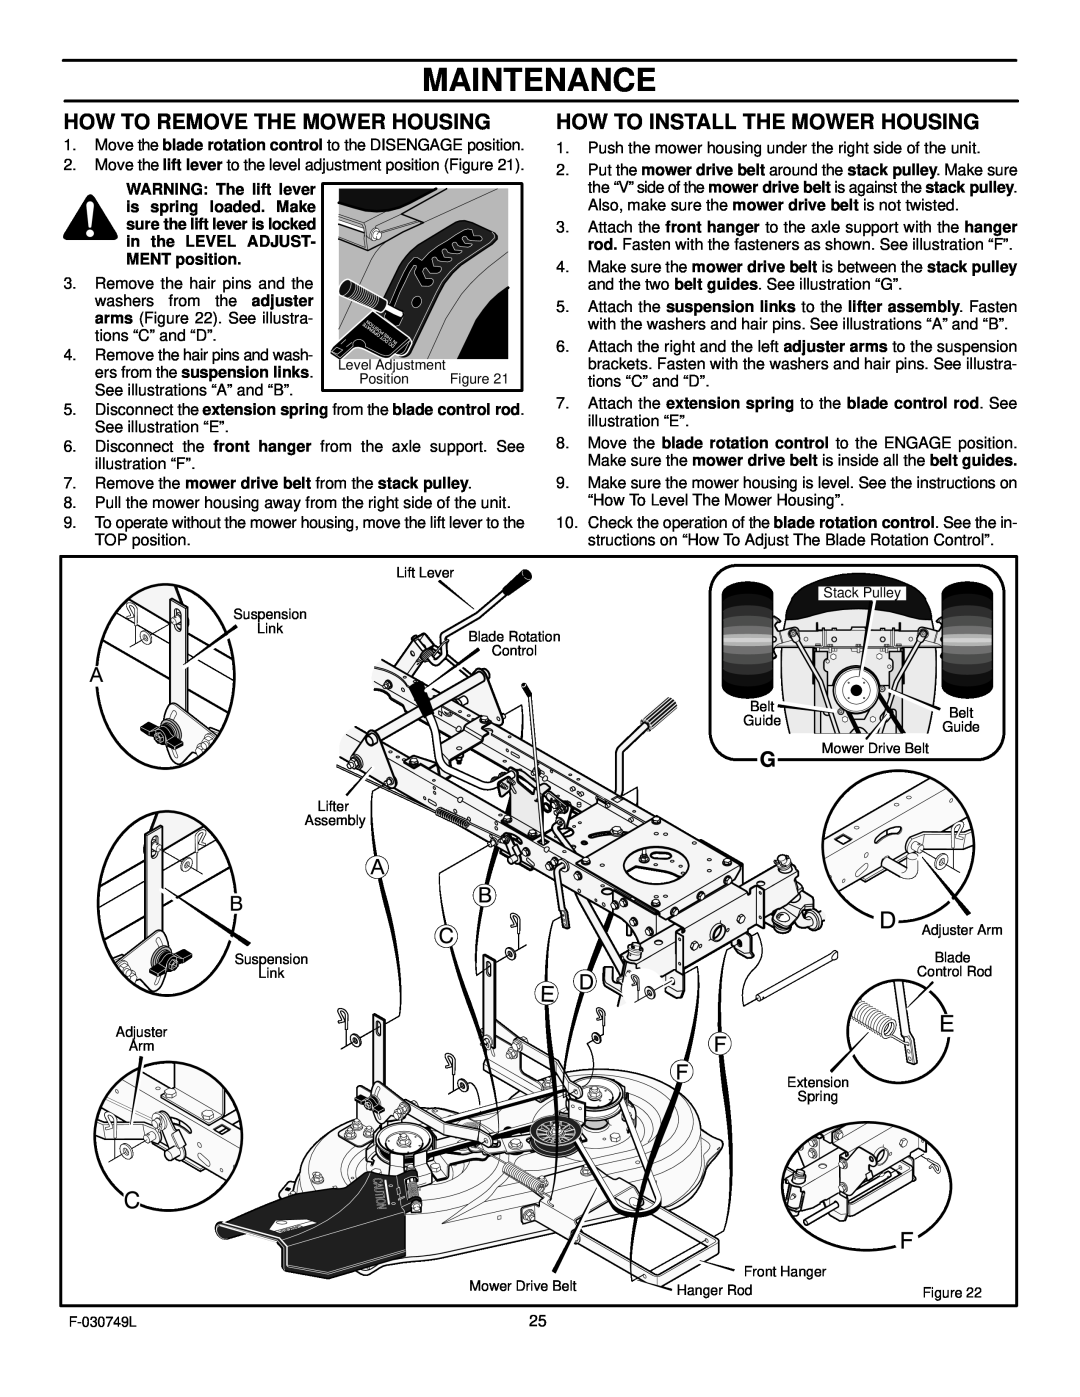 Murray 405030x48A manual Maintenance, How To Remove The Mower Housing, How To Install The Mower Housing 